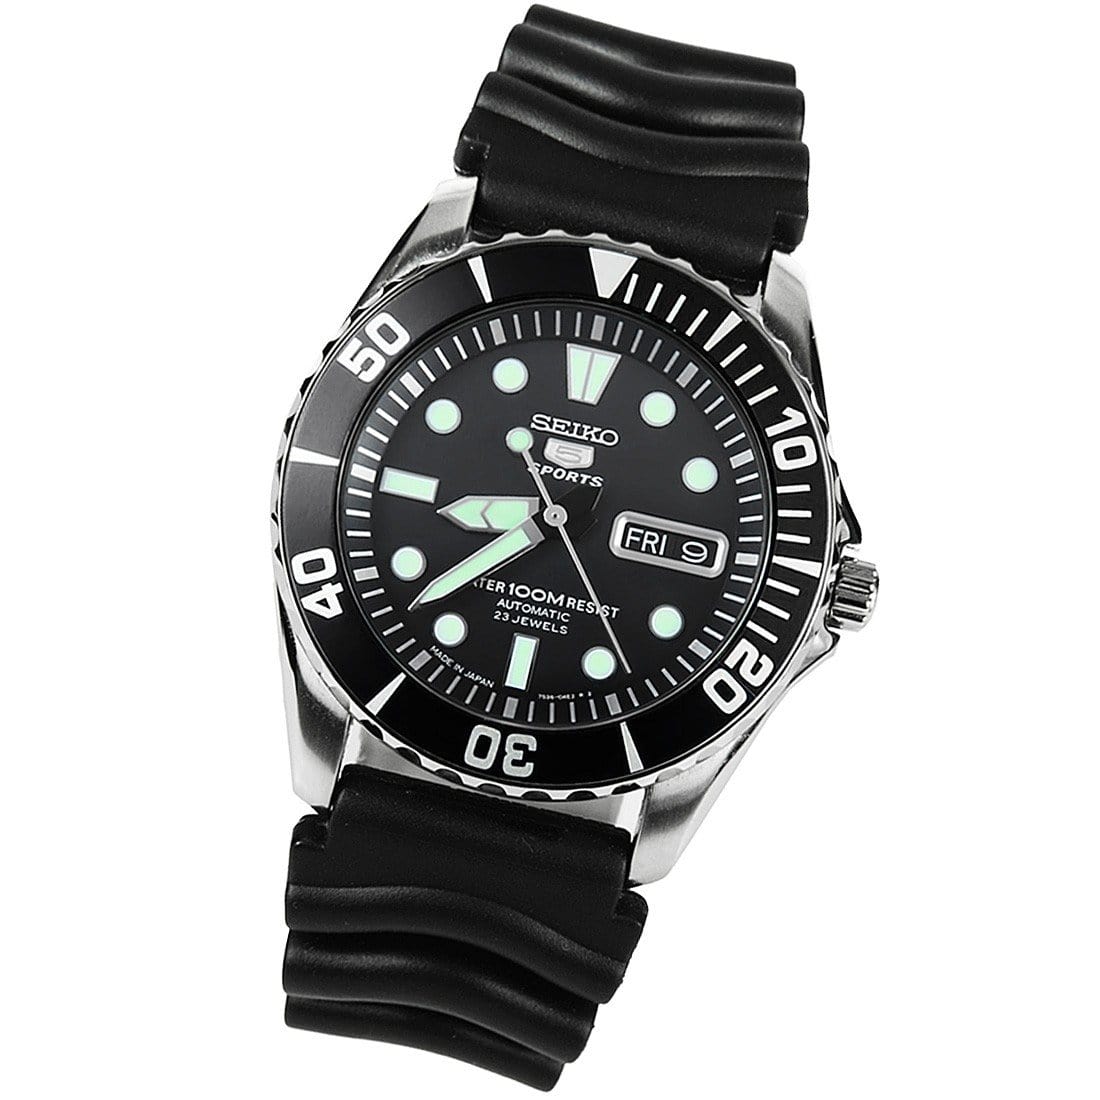 SNZF17J2 SNZF17 Seiko 5 Sports Diving Watch with Nylon Band